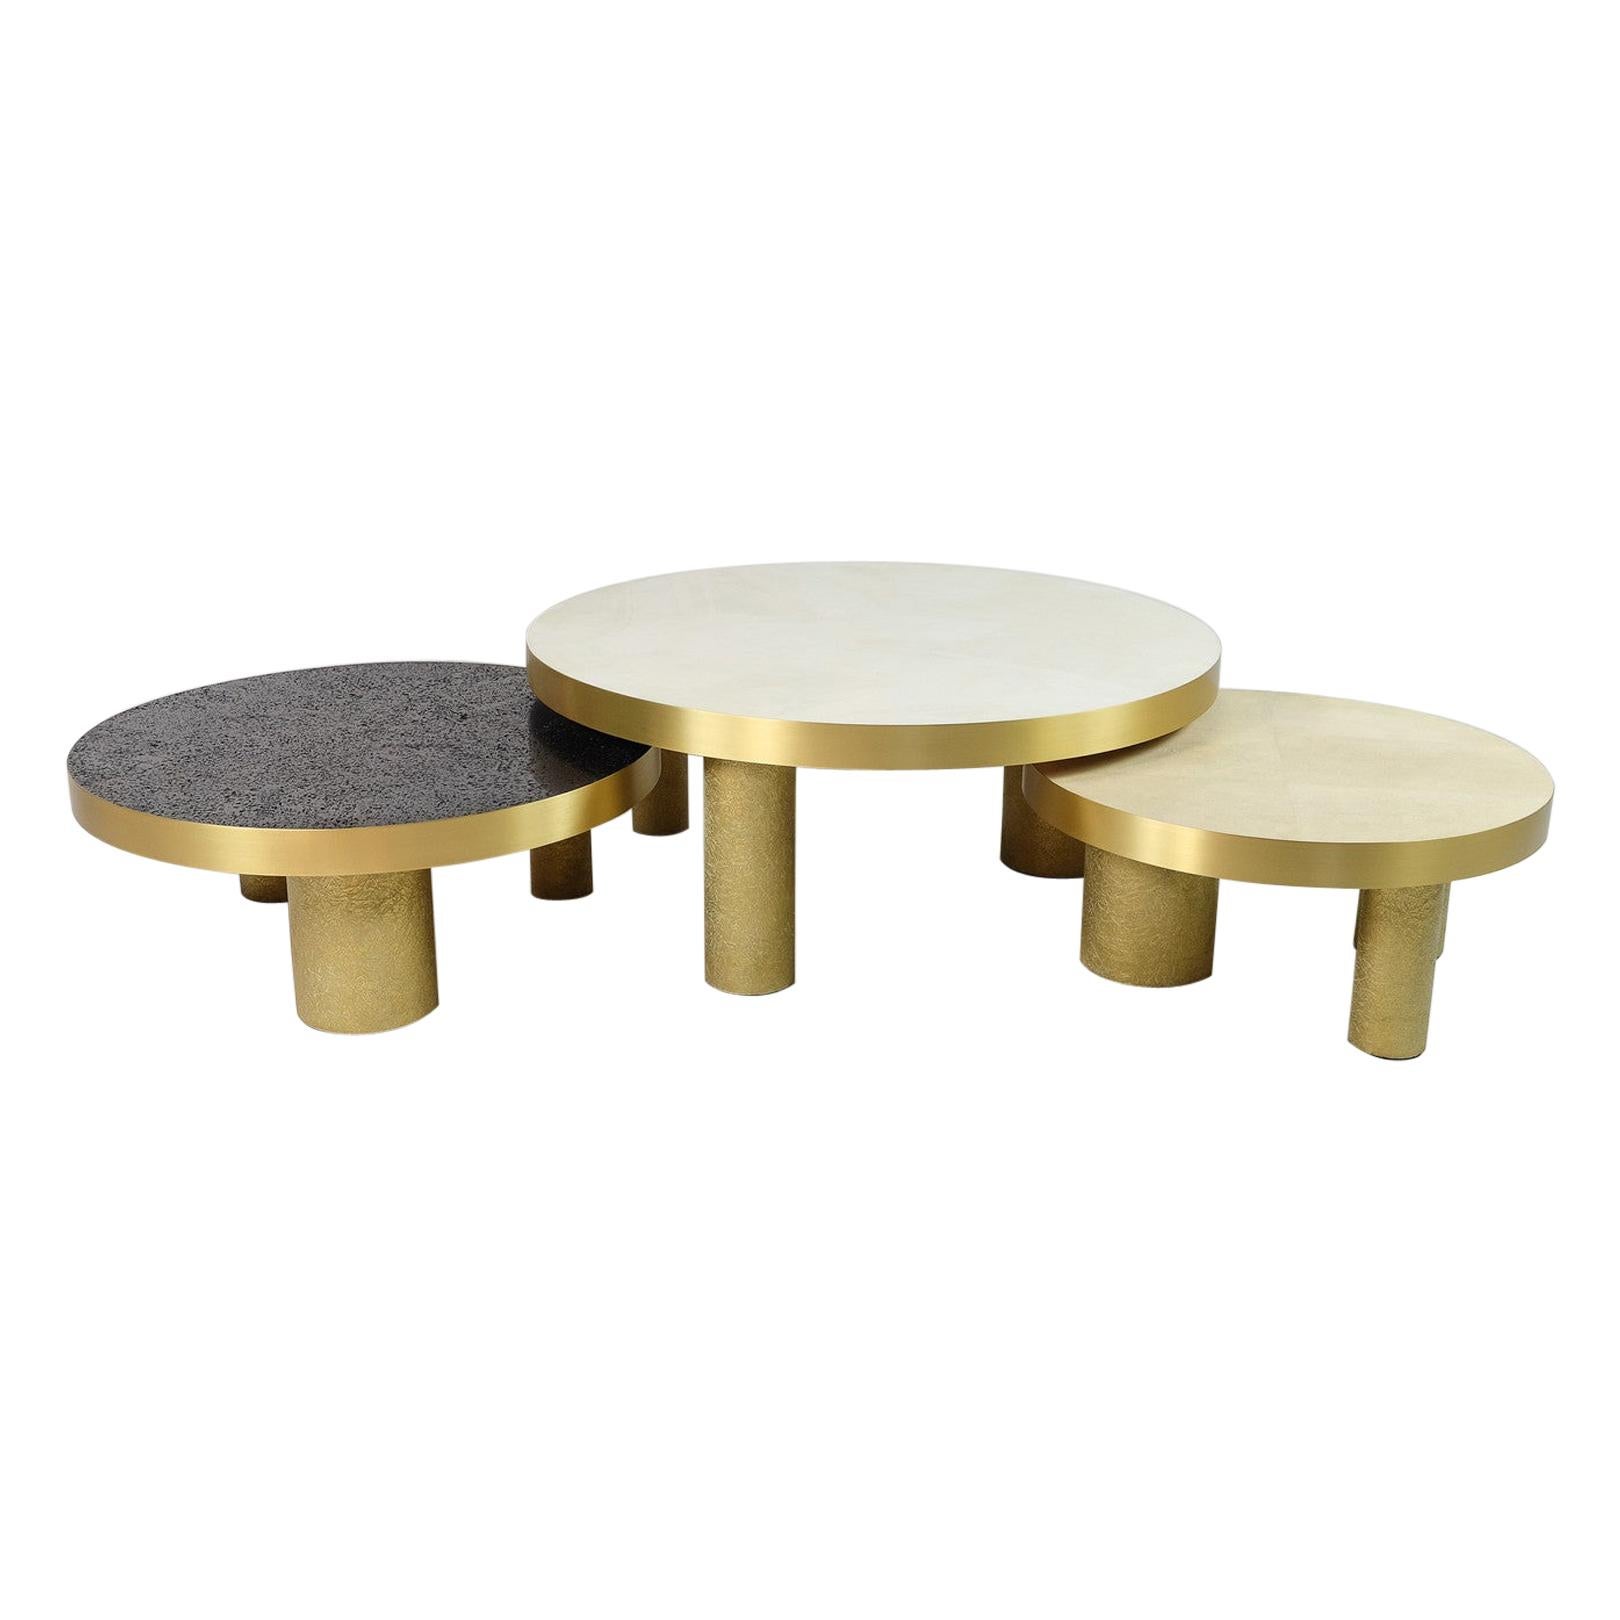 Set of 3 Coffee Tables in Rock Crystal, Shagreen and Lava Stone by Ginger Brown